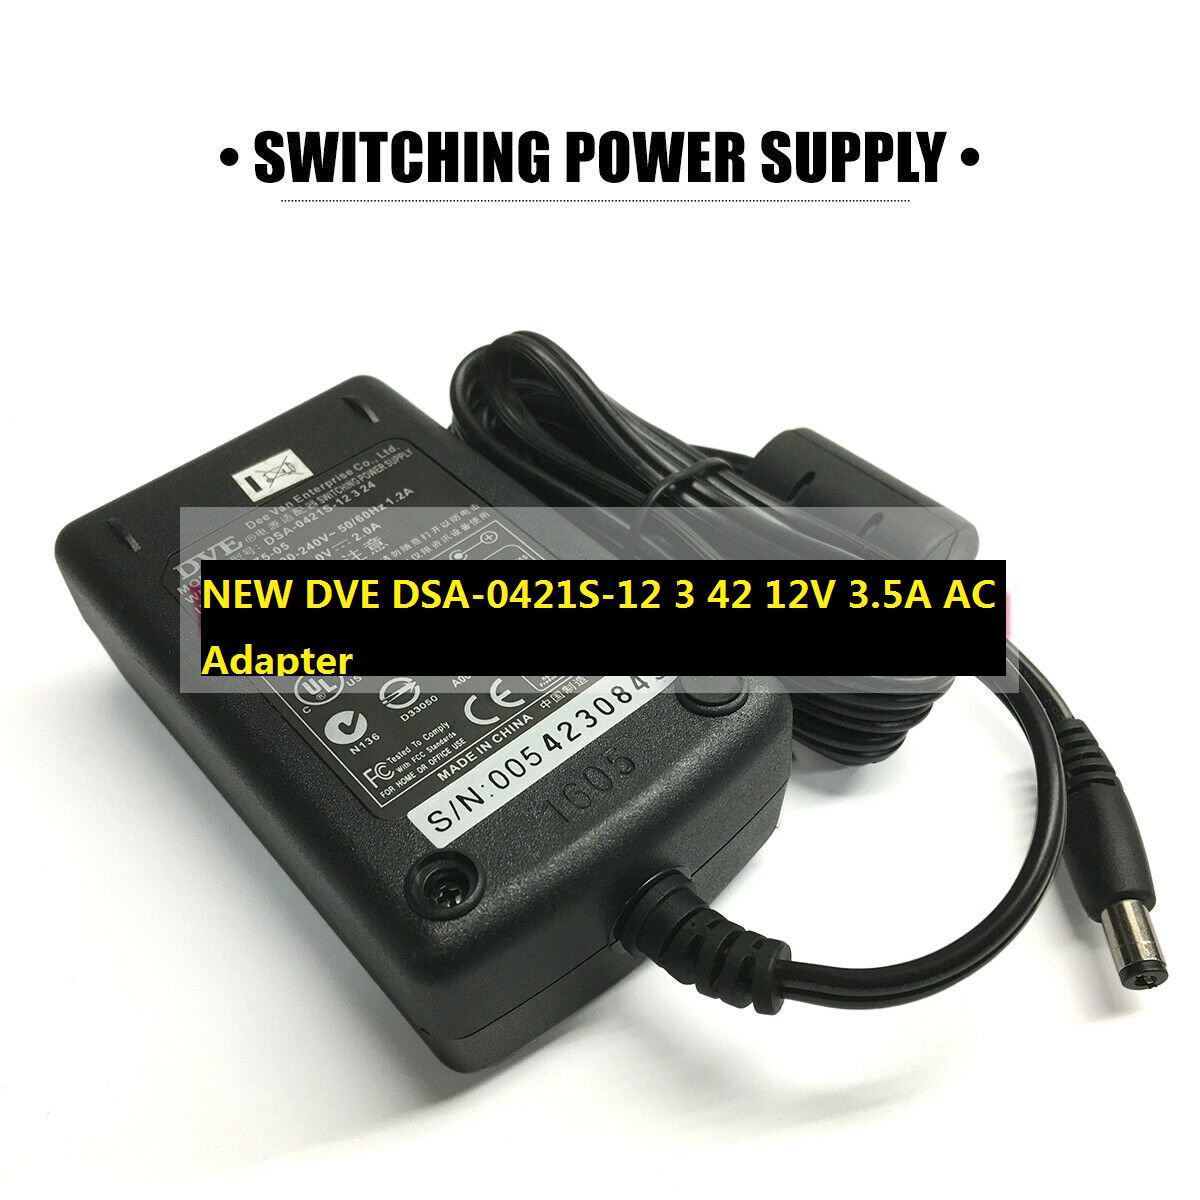 *Brand NEW* DVE DSA-0421S-12 3 42 12V 3.5A AC Adapter KORG DSA-0421S-121 Power Supply Charger - Click Image to Close